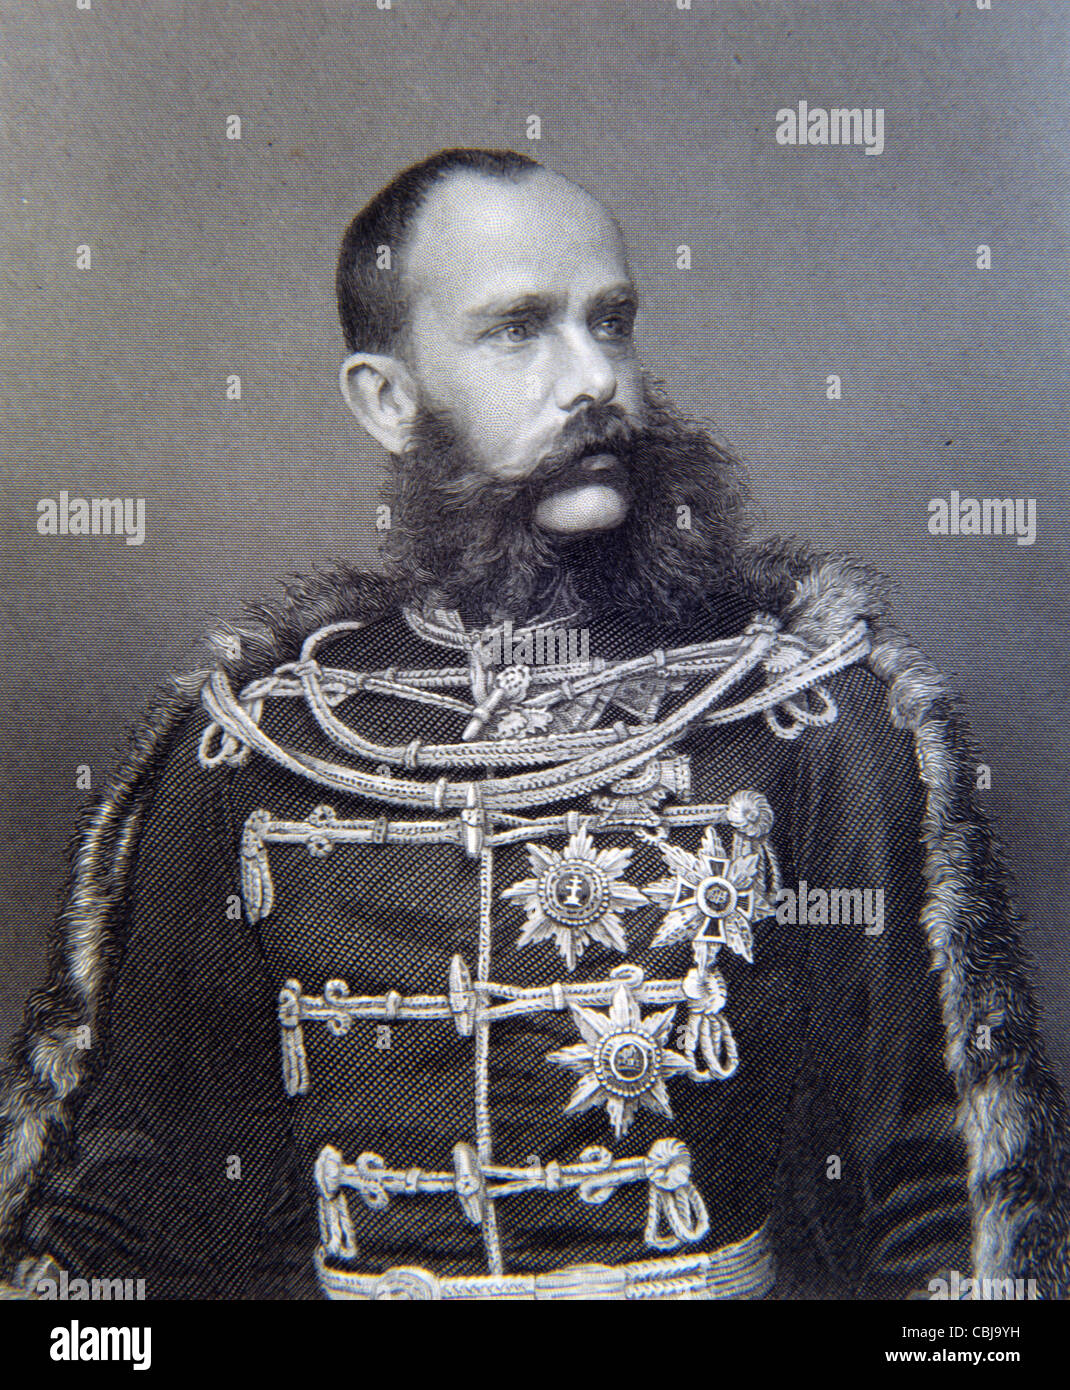 Portrait of Franz Joseph I or Francis Joseph I, Emperor of Austria (1848-1916) and King of Hungary (1867-1916) Portrait in Military Uniform. Vintage Illustration or Engraving Stock Photo